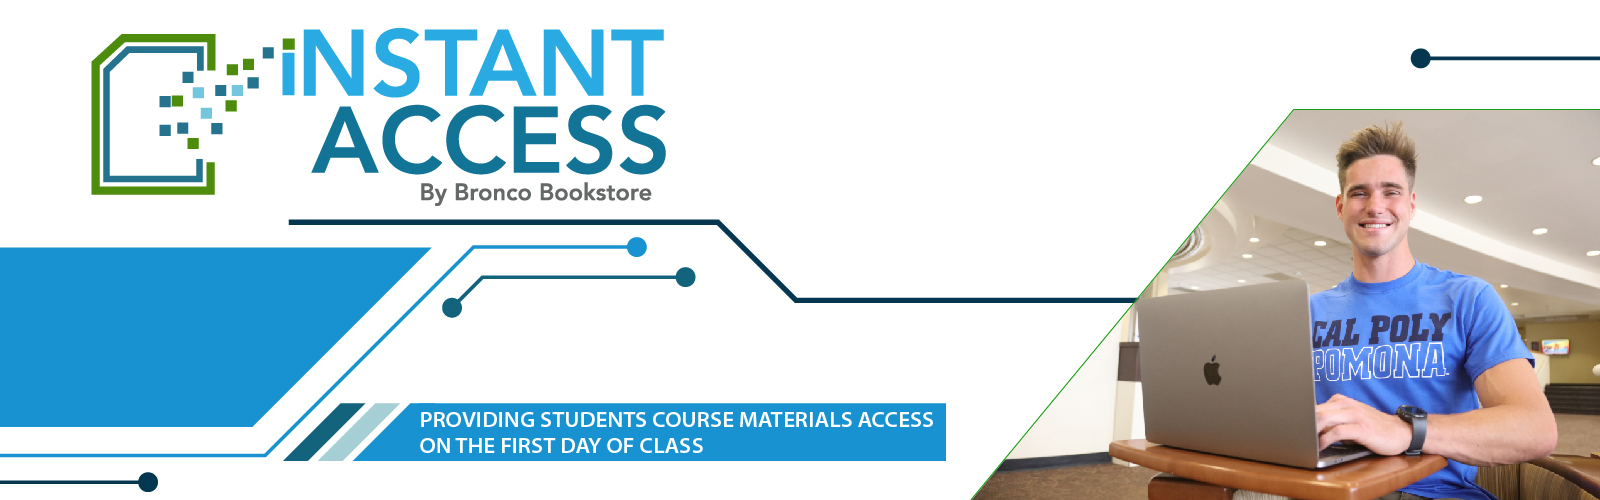 Instant Access by Bronco Bookstore, providing students course materials access